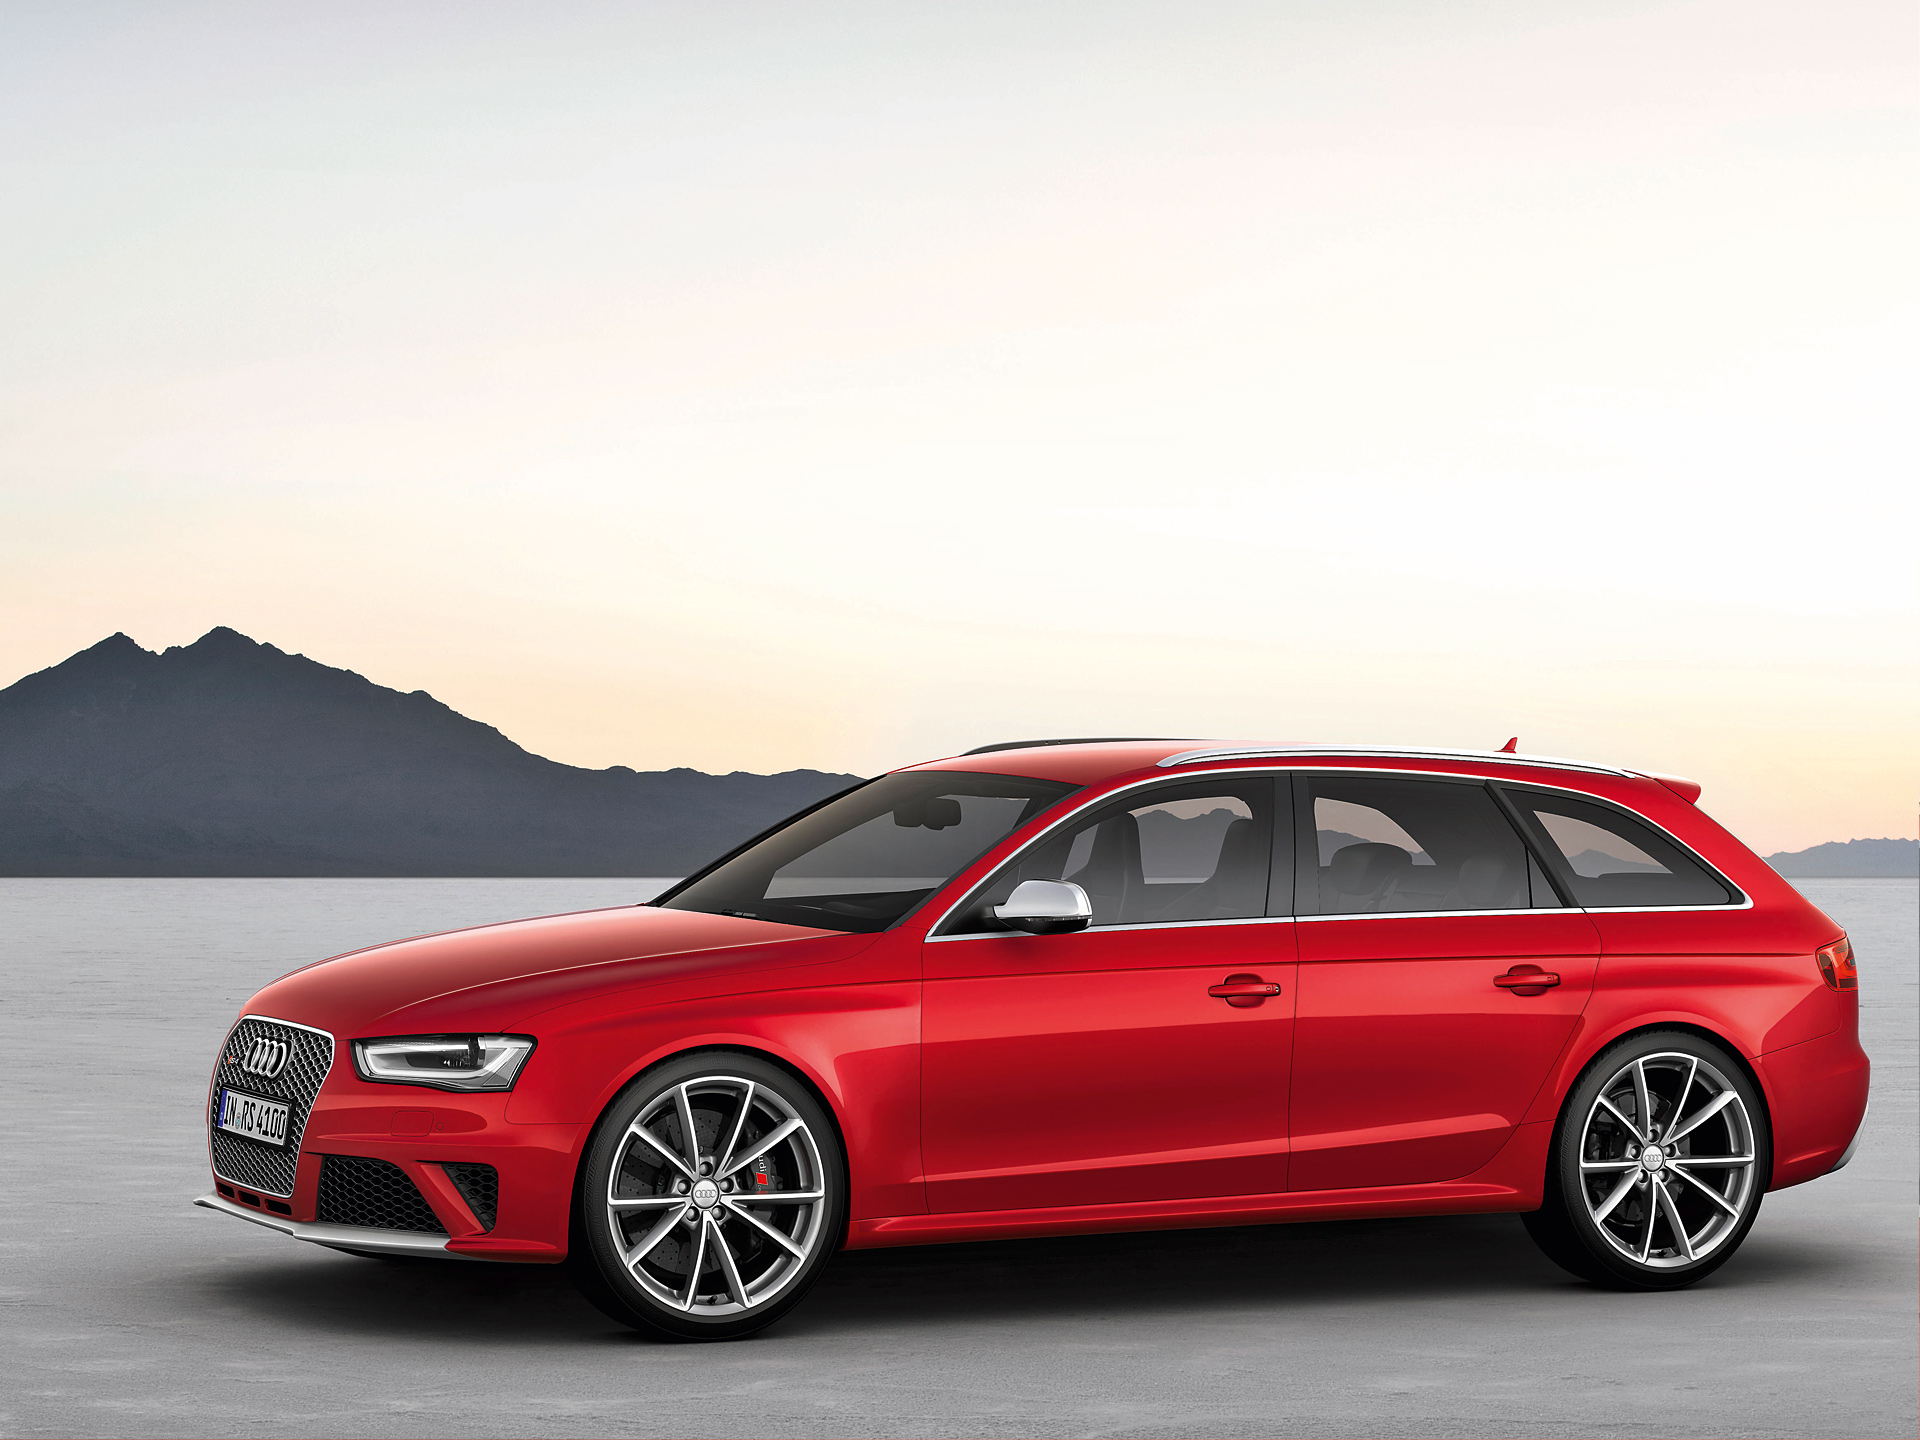 Vehicles Audi RS4 HD Wallpaper | Background Image